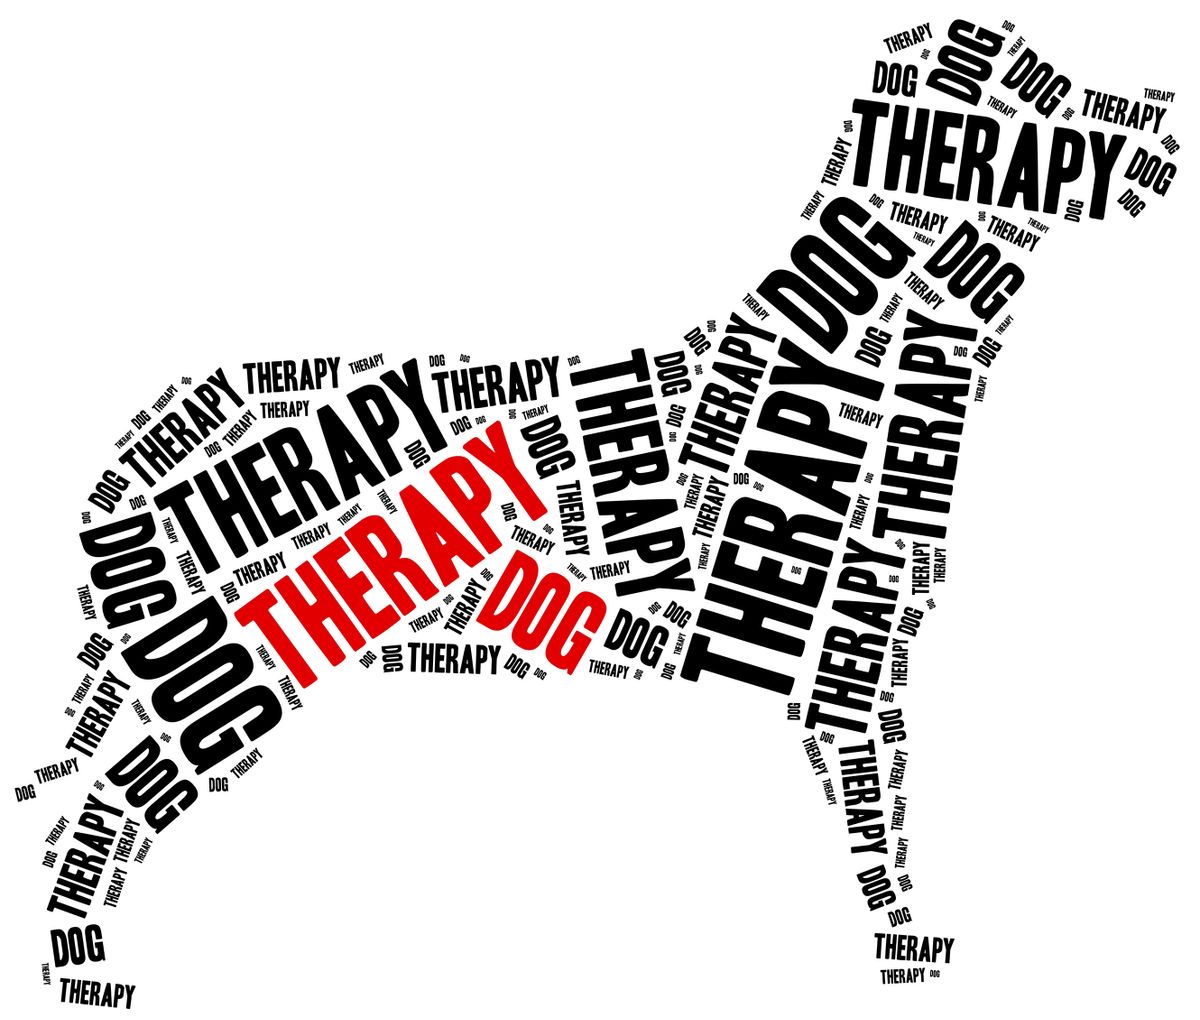 Therapy,Dog,Or,Animal,Assisted,Therapy,Concept.